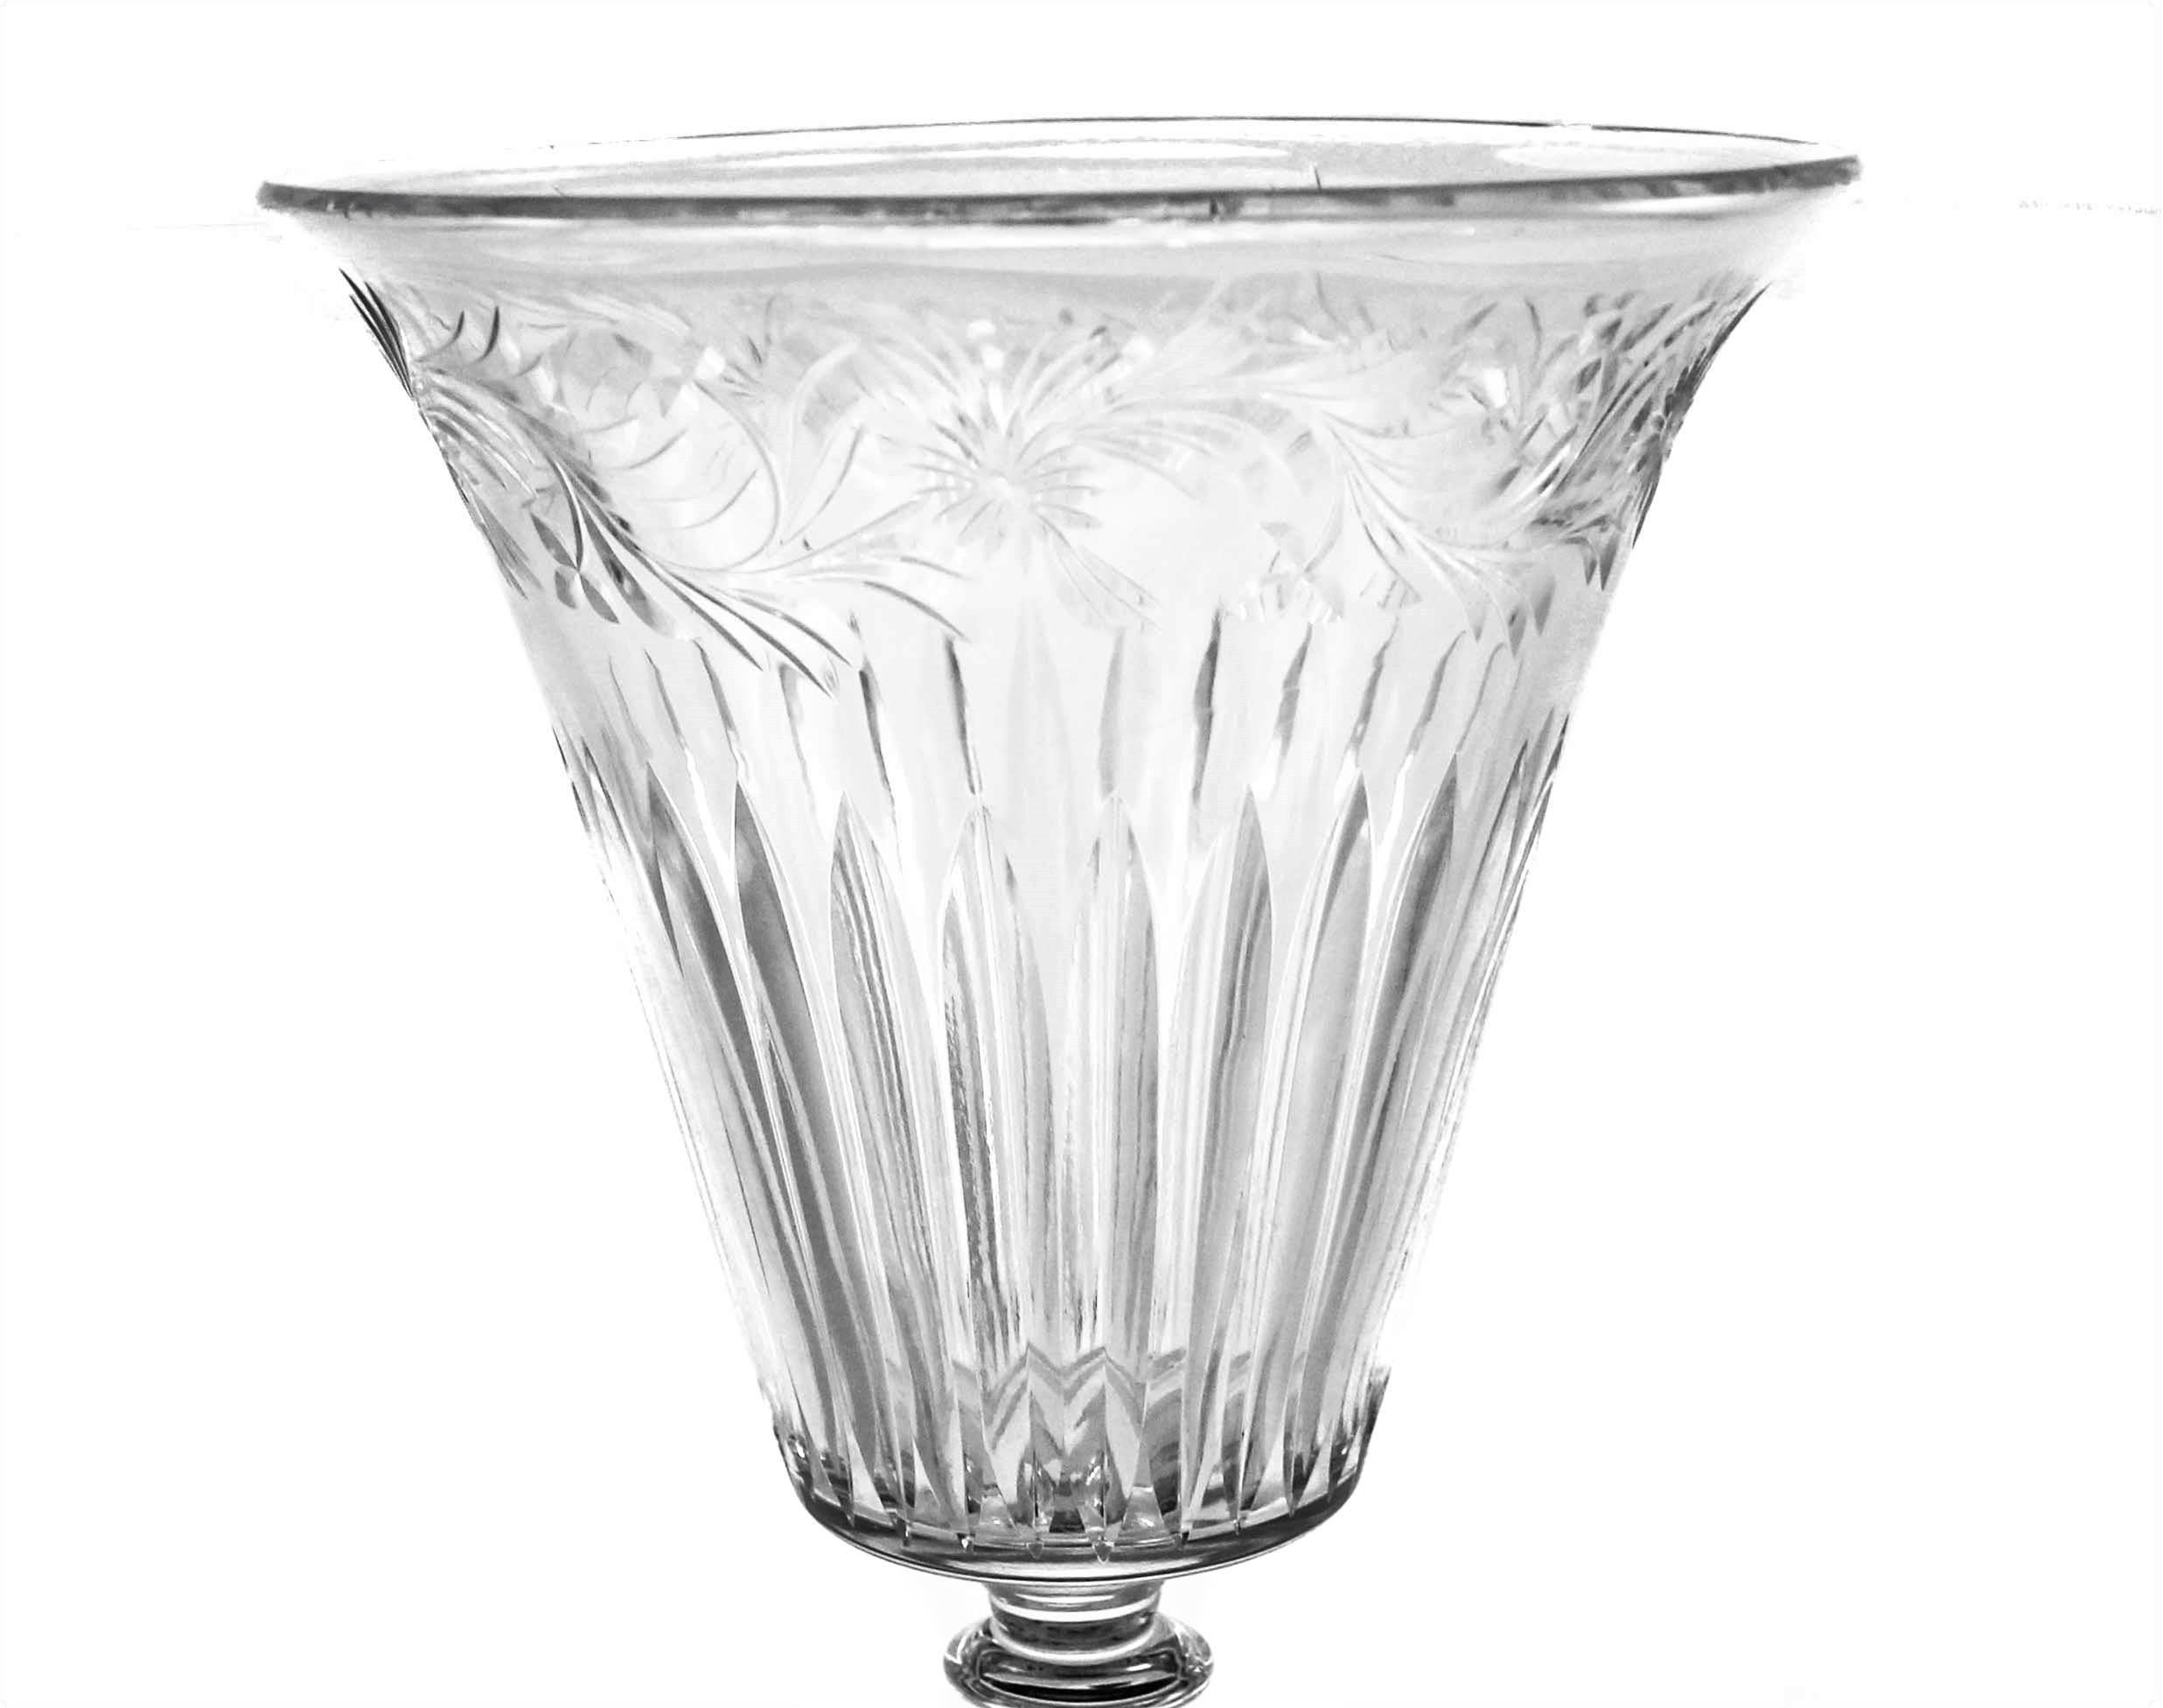 What makes this vase so interesting is that it's a mix between the old and the new; pretty cut-crystal along the top in contrast to the round crystal ball above the base. The best of both worlds!